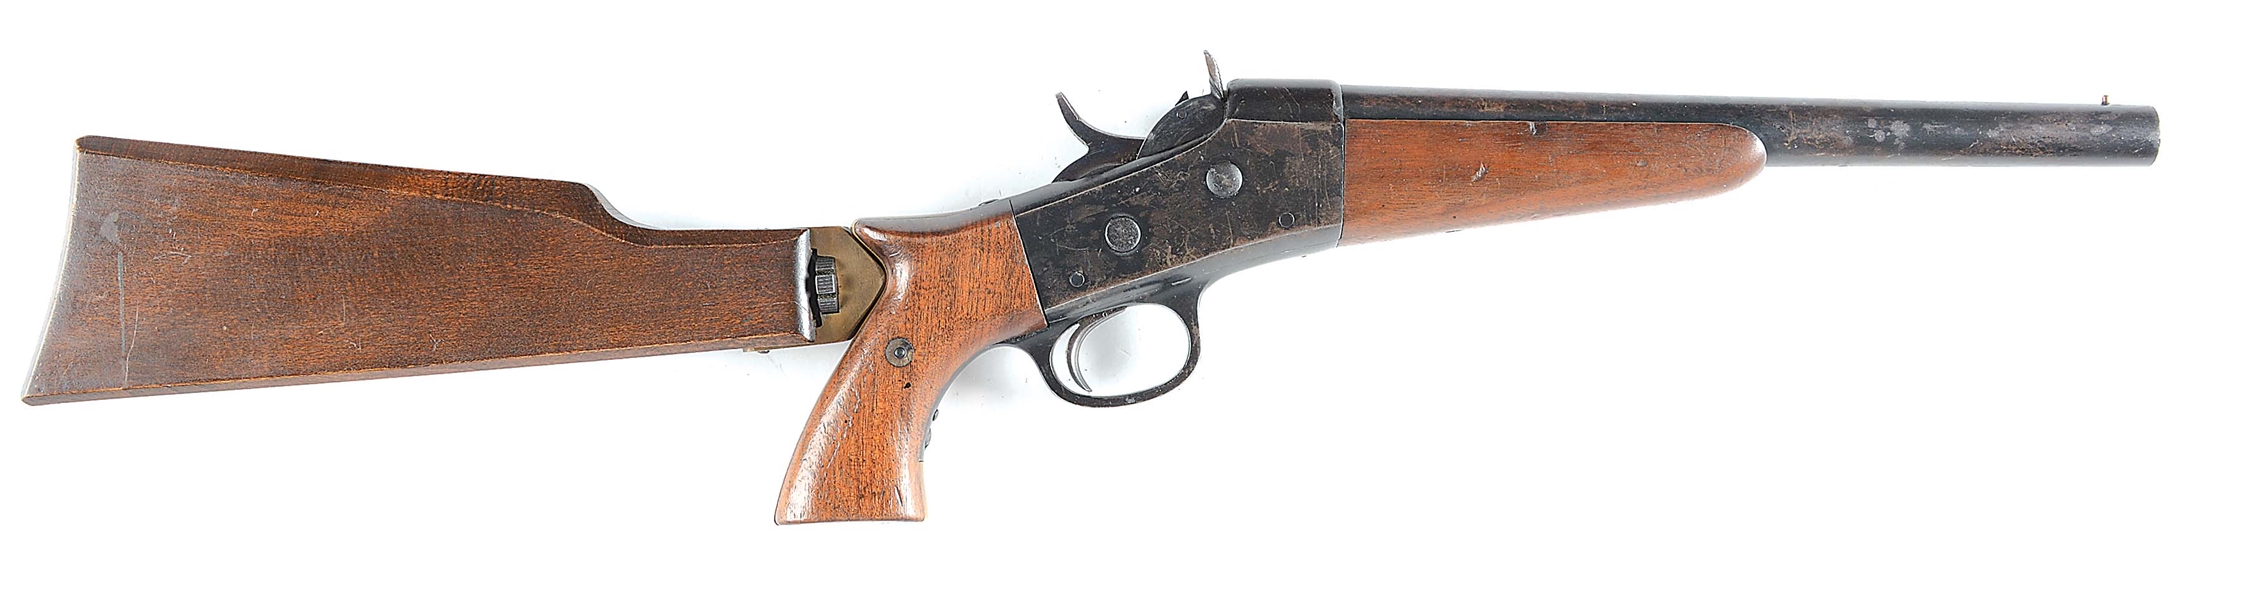 (N) EXTREMELY SCARCE REMINGTON ROLLING BLOCK 16 GAUGE SHOTGUN/ PISTOL WITH STOCK ("ANY OTHER WEAPON") 